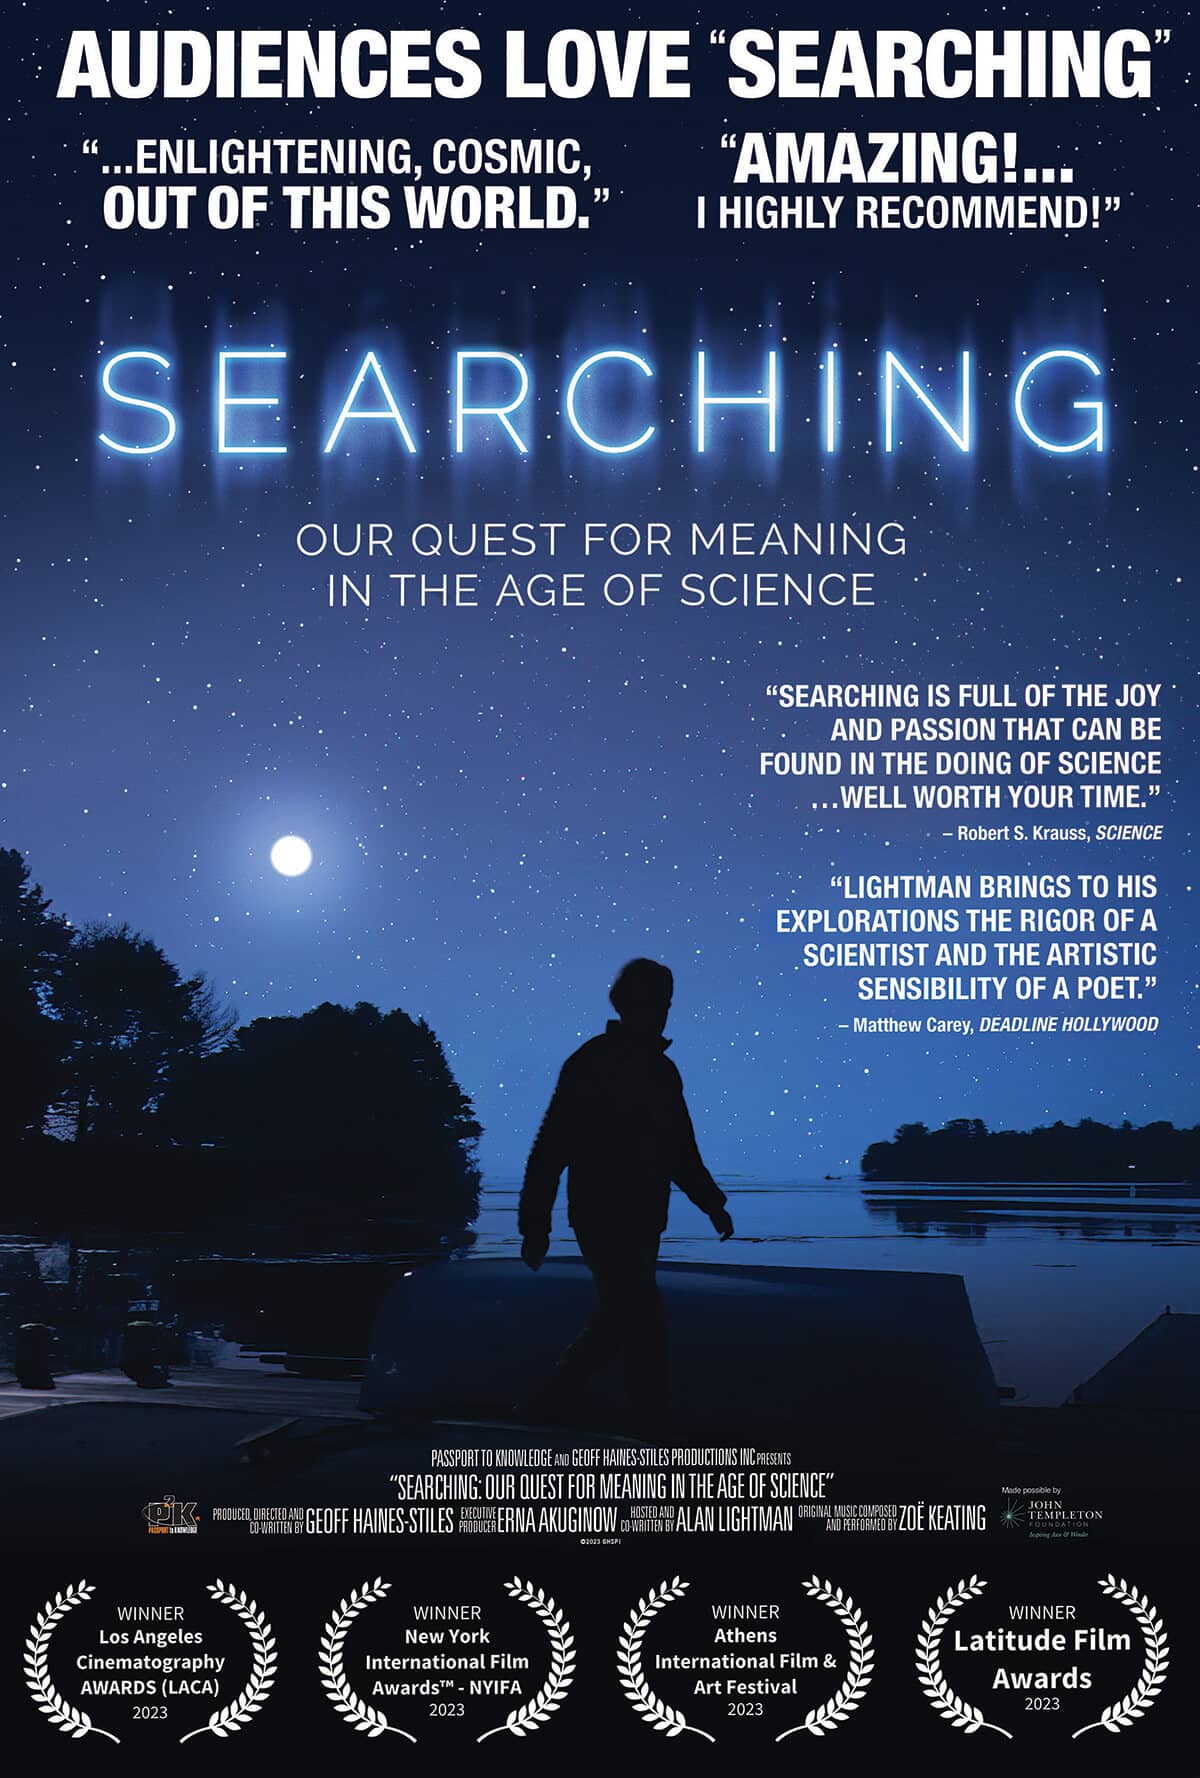 The poster for the Searching Documentary